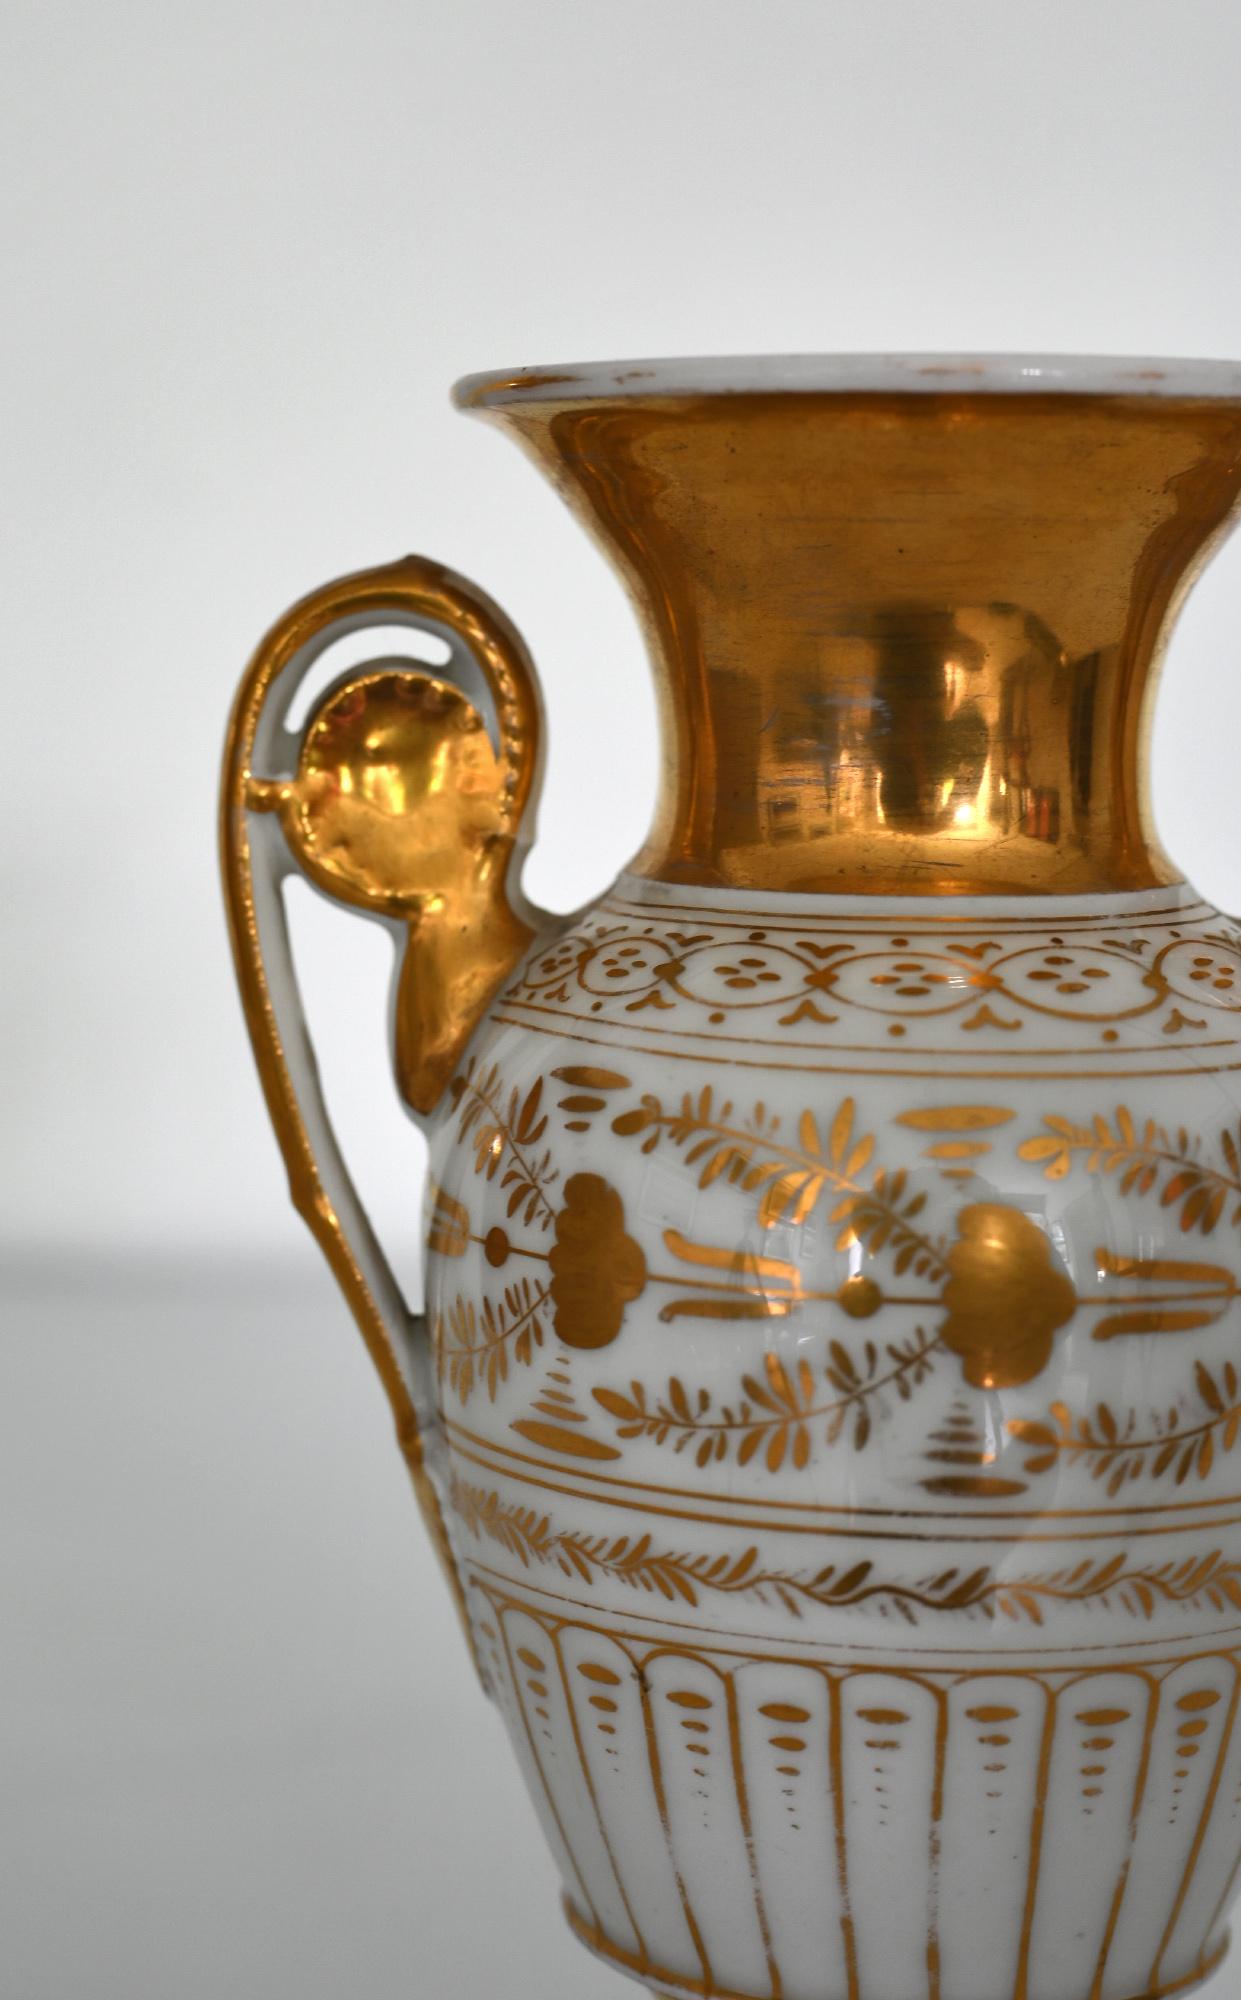 Small amphora vase made in Paris in the early 19th century.
It is an beautiful decorative porcelain object in the original condition, the gold is partially rubbed.